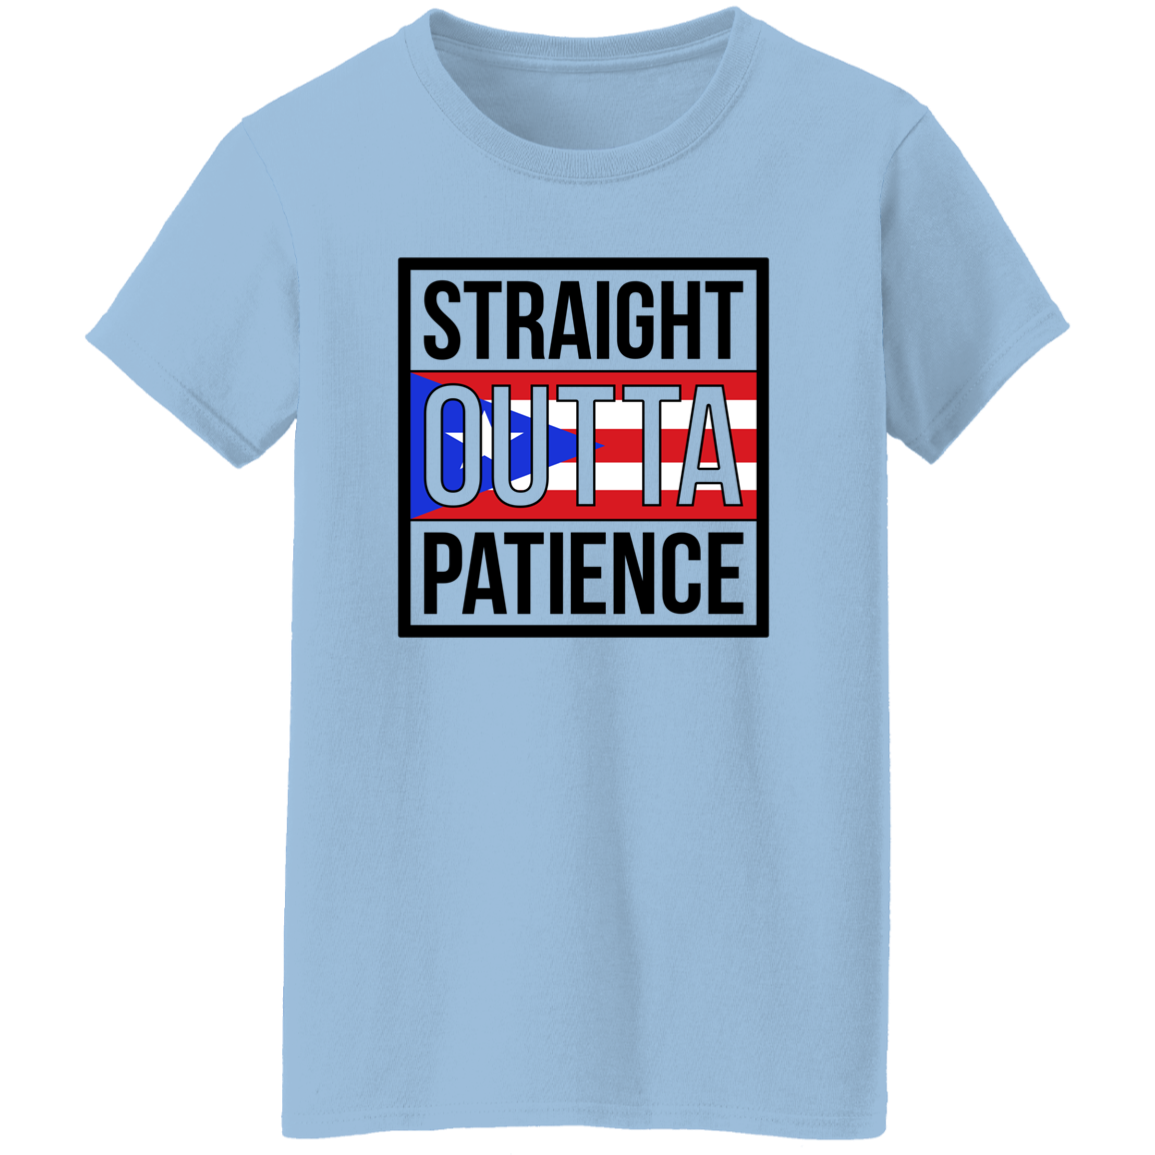 Straight Outta Patience - Ladies' 5.3 oz. T-Shirt